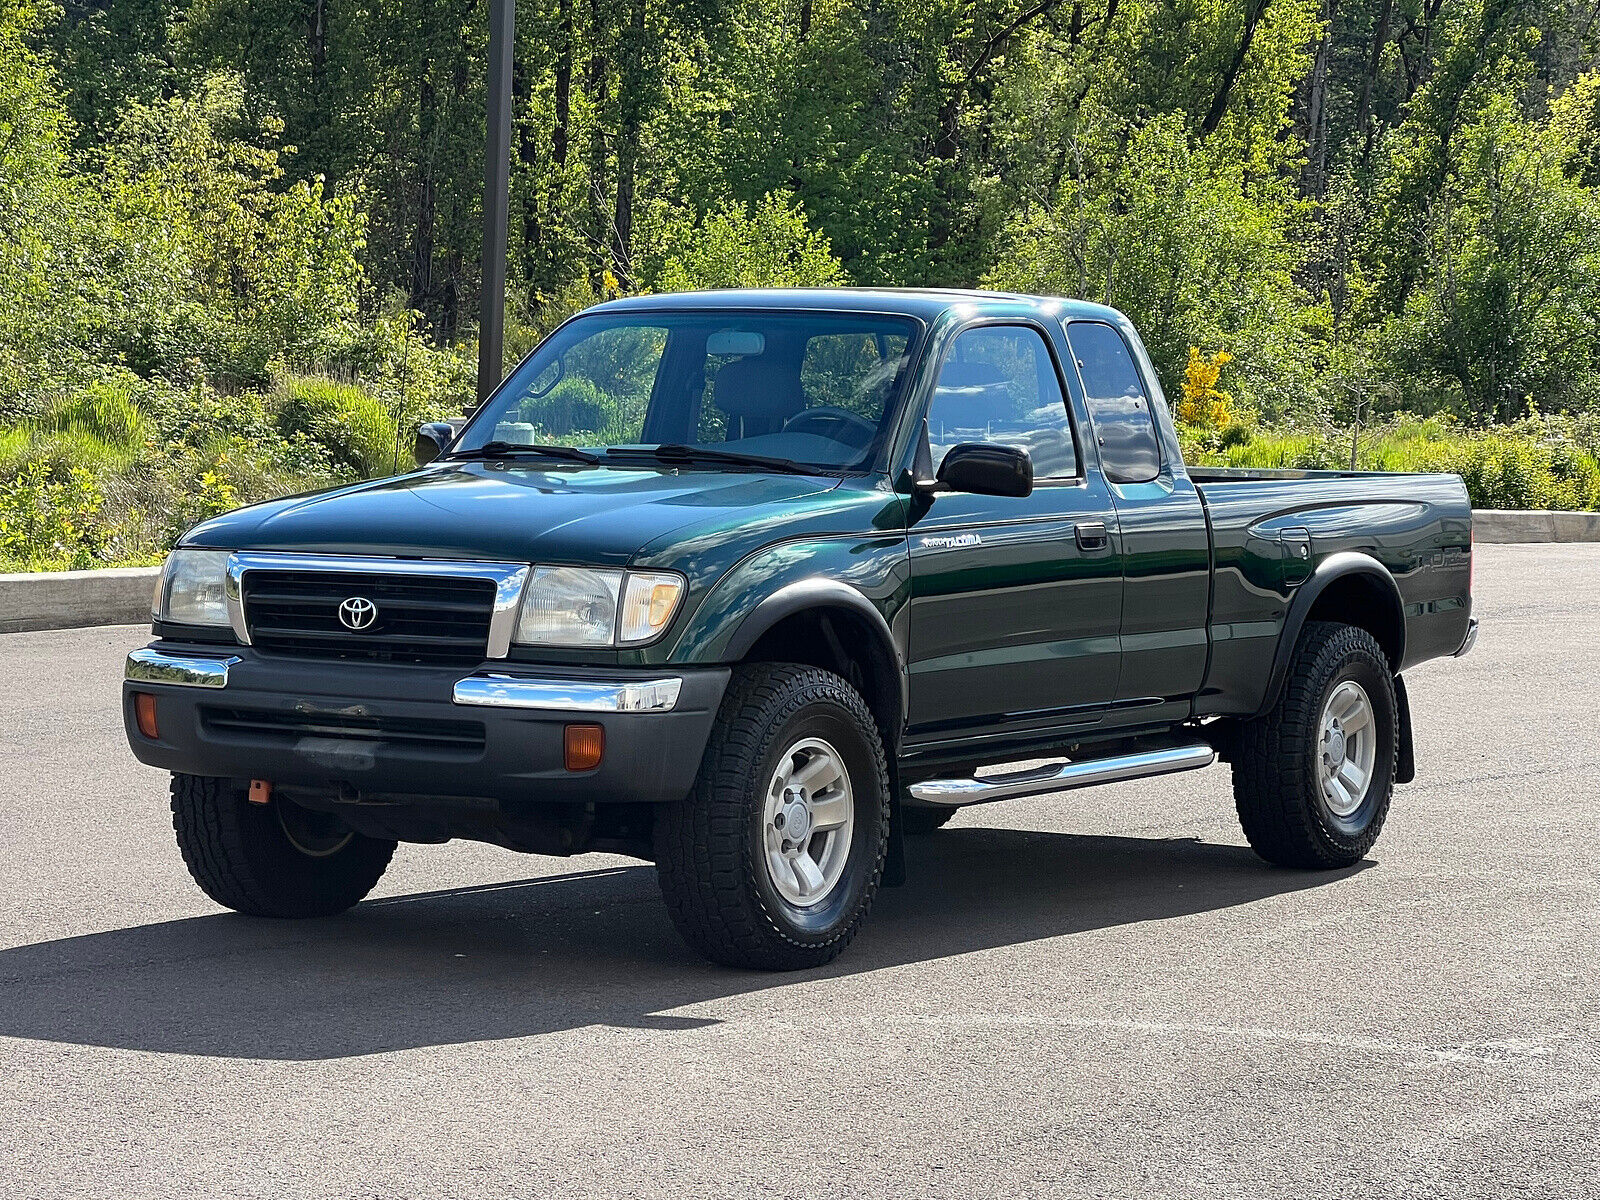 1999 Toyota Tacoma SR5 Xtra Cab 4x4 TRD Automatic Only 70,000 Miles!